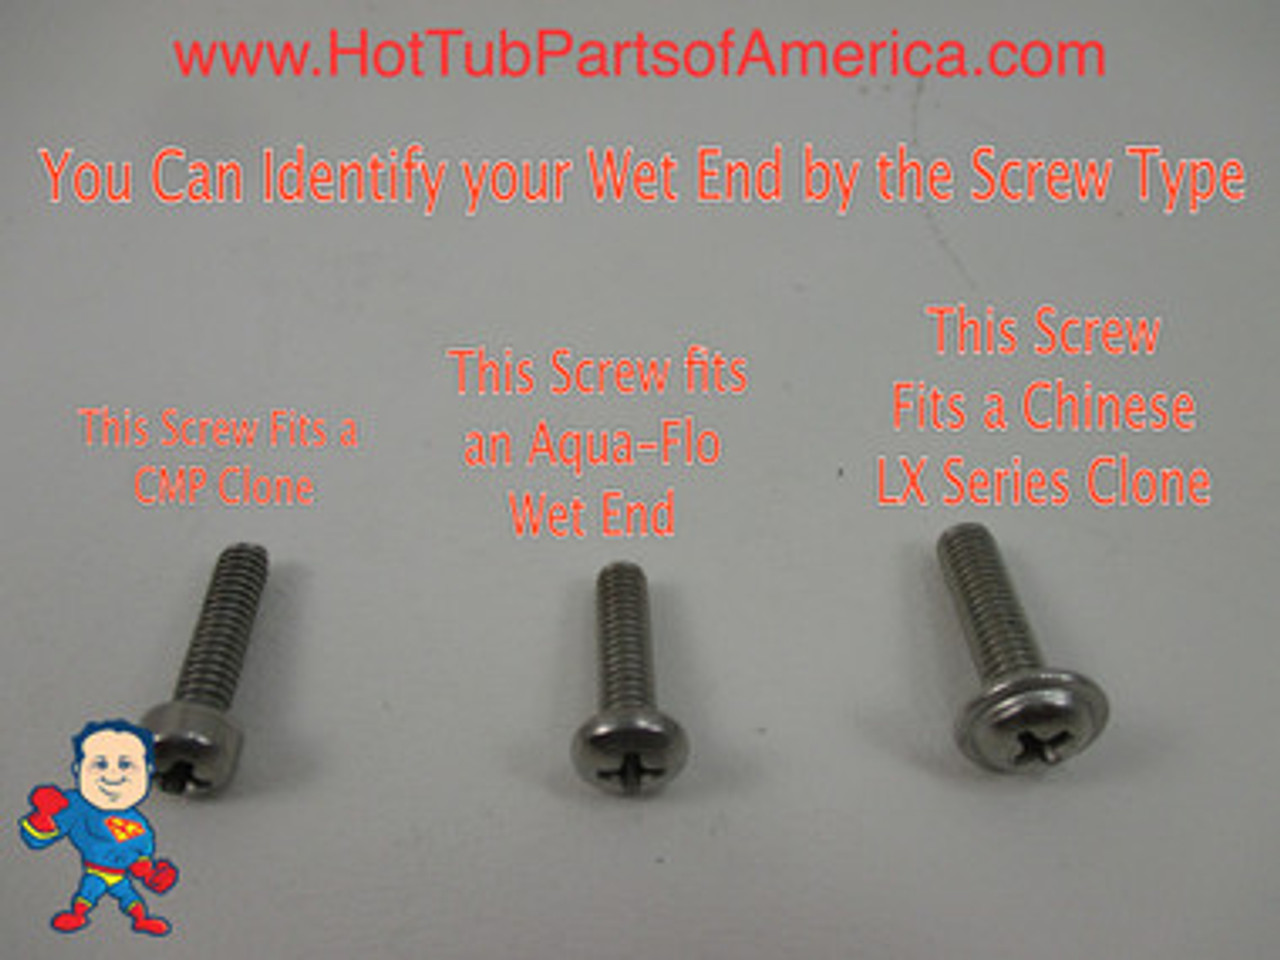 Compare your screws to be sure that this is the correct wet end.